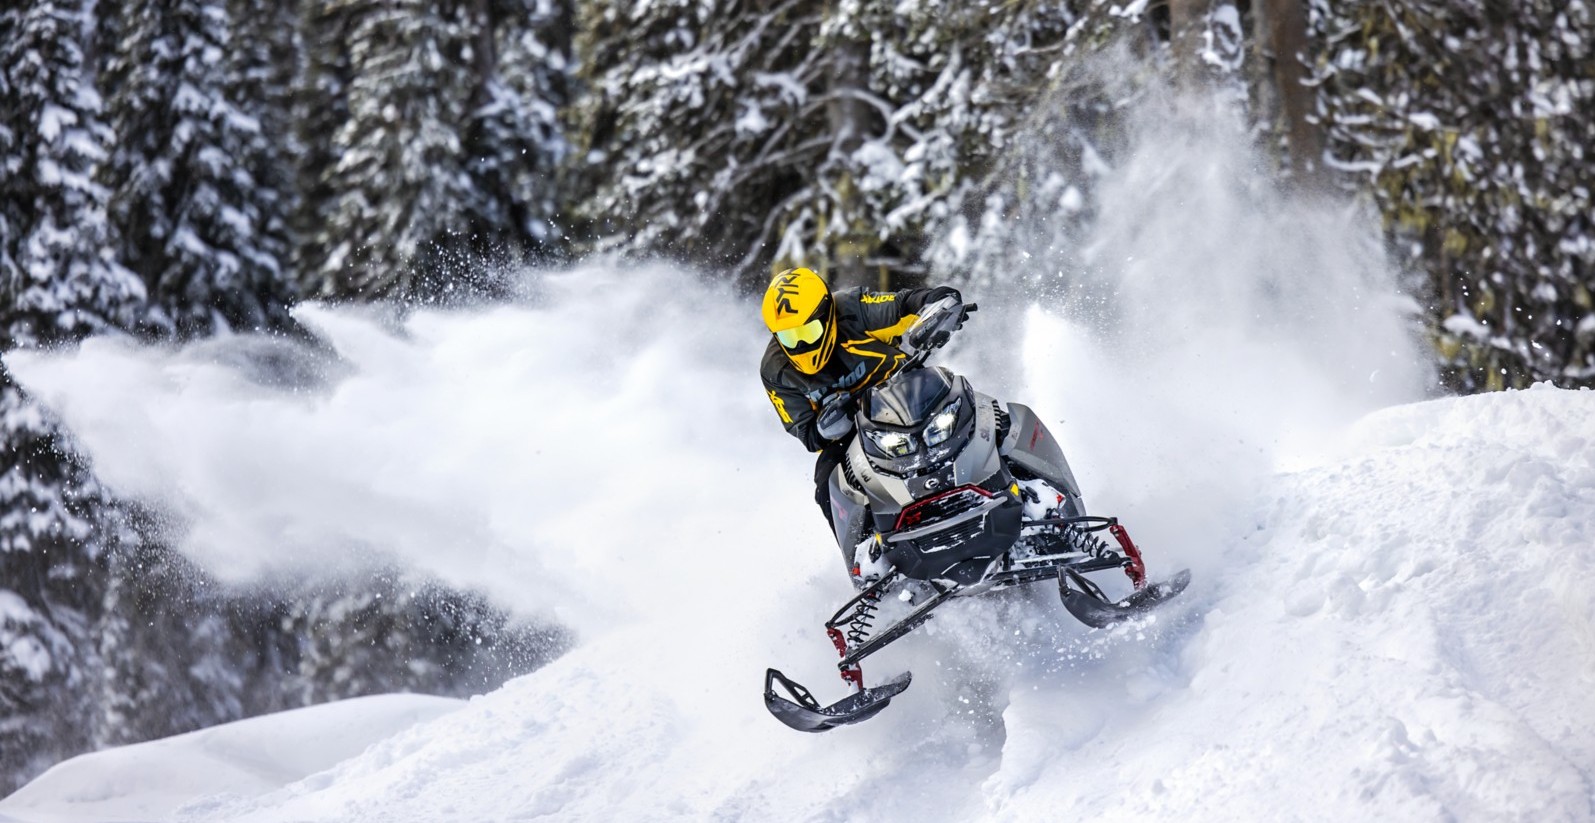 What’s New for Ski-Doo in 2023